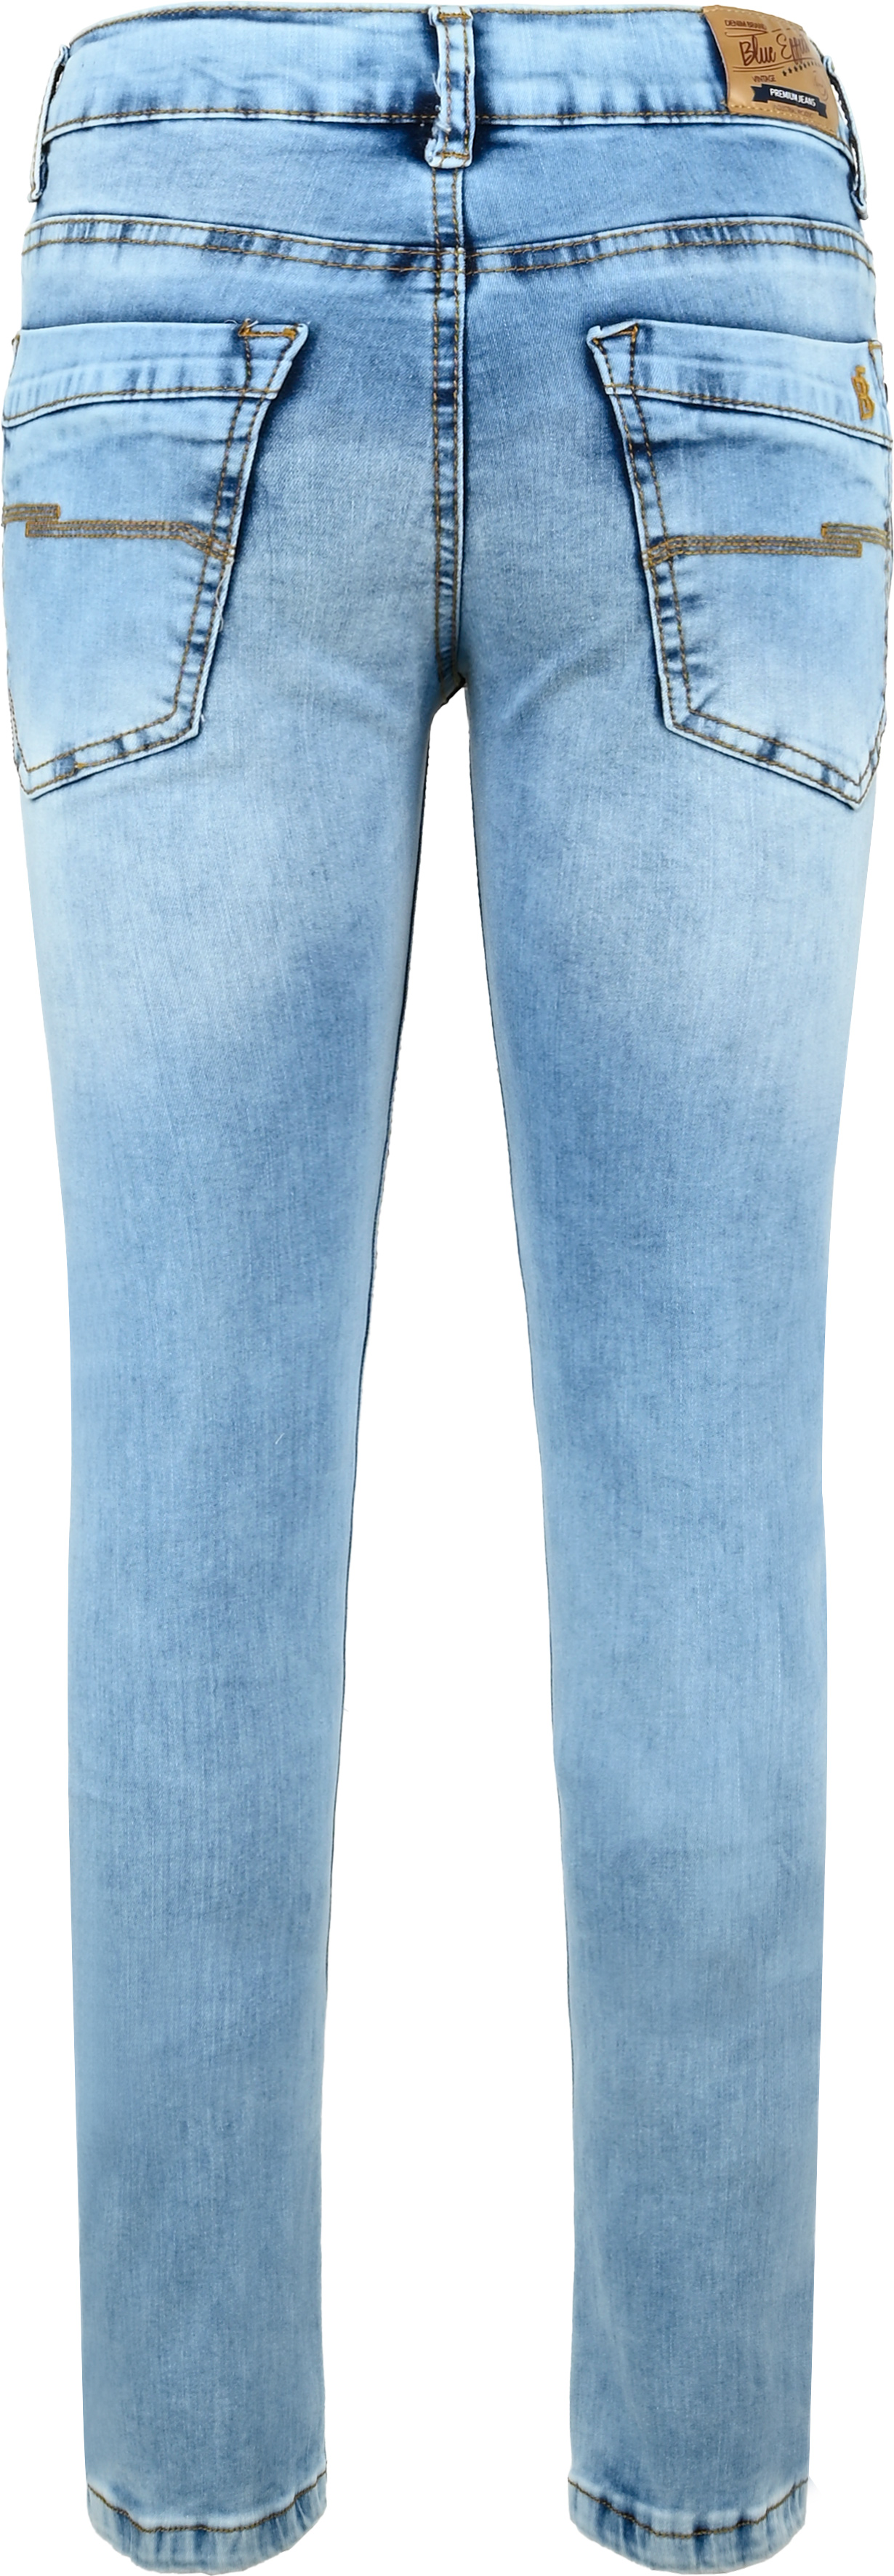 2833-Boys Relaxed Fit Jeans available in Slim, Normal